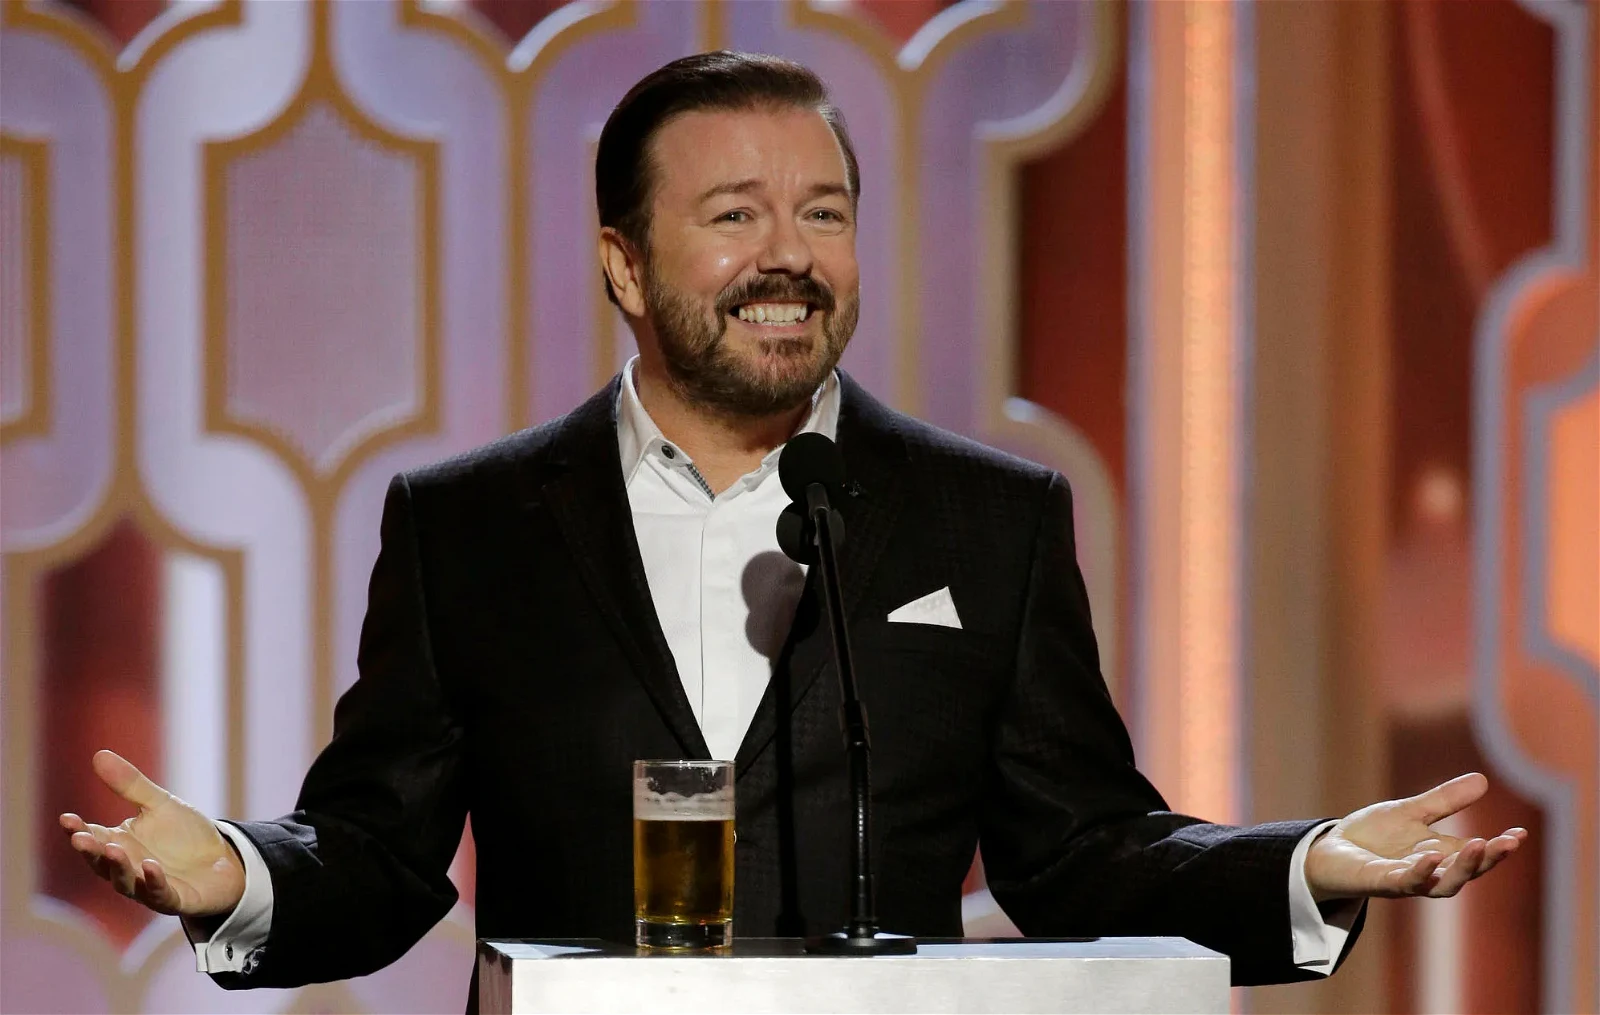 Ricky Gervais roasted Marvel at the Golden Globes